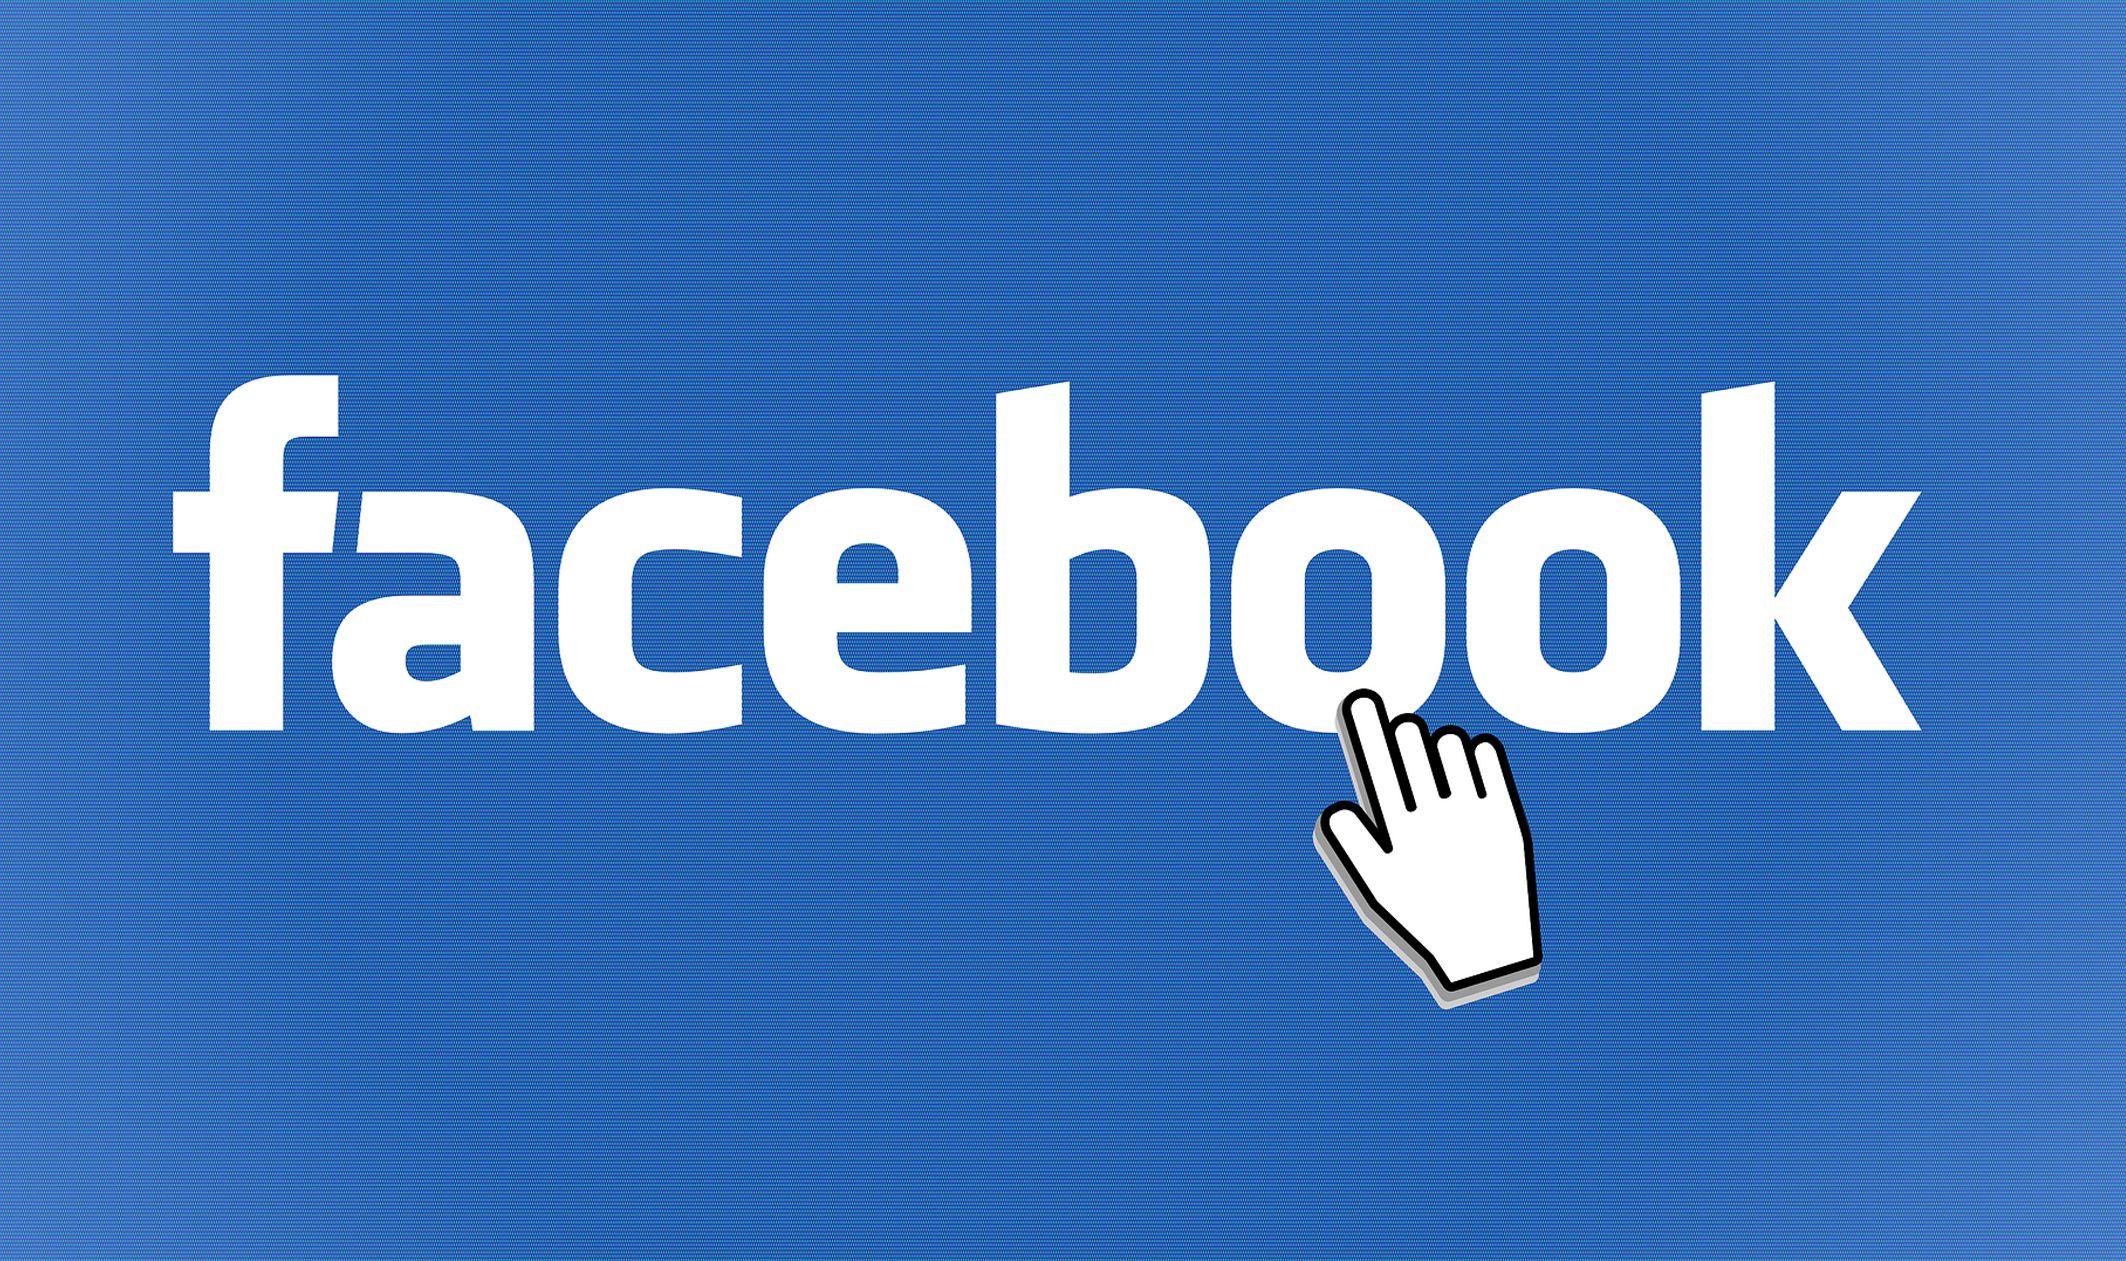 Find Me On Facebook Logo - Things You Need to Know About The Recent Facebook Changes